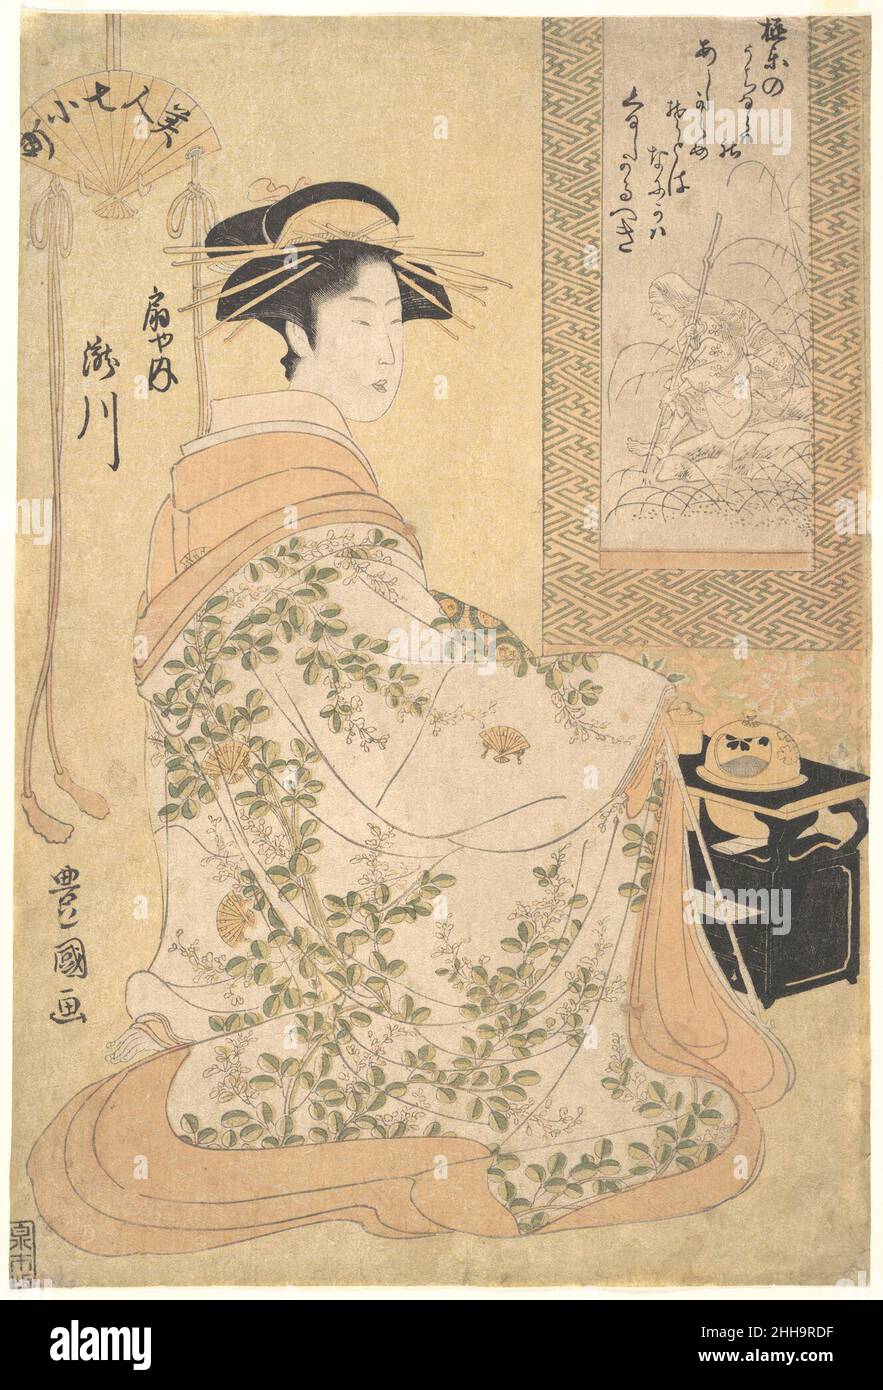 Takigawa of the Ogiya Pleasure House early 19th century Utagawa Toyokuni I Japanese Robed in a splendid floral kimono, the famous courtesan, Takigawa of the Ogiya Pleasure House, sits before a hanging scroll portrait of Ono no Komachi in her late years. Ono no Komachi, a great poet of the Heian period, was admired for her beauty. Her legendary decline into decrepit old age was taken as a paradigm for the Buddhist concept of the ephemerality of life and its pleasures. Toyokuni shows the two famous beauties—one his contemporary and the other her predecessor by many centuries—facing each other in Stock Photo